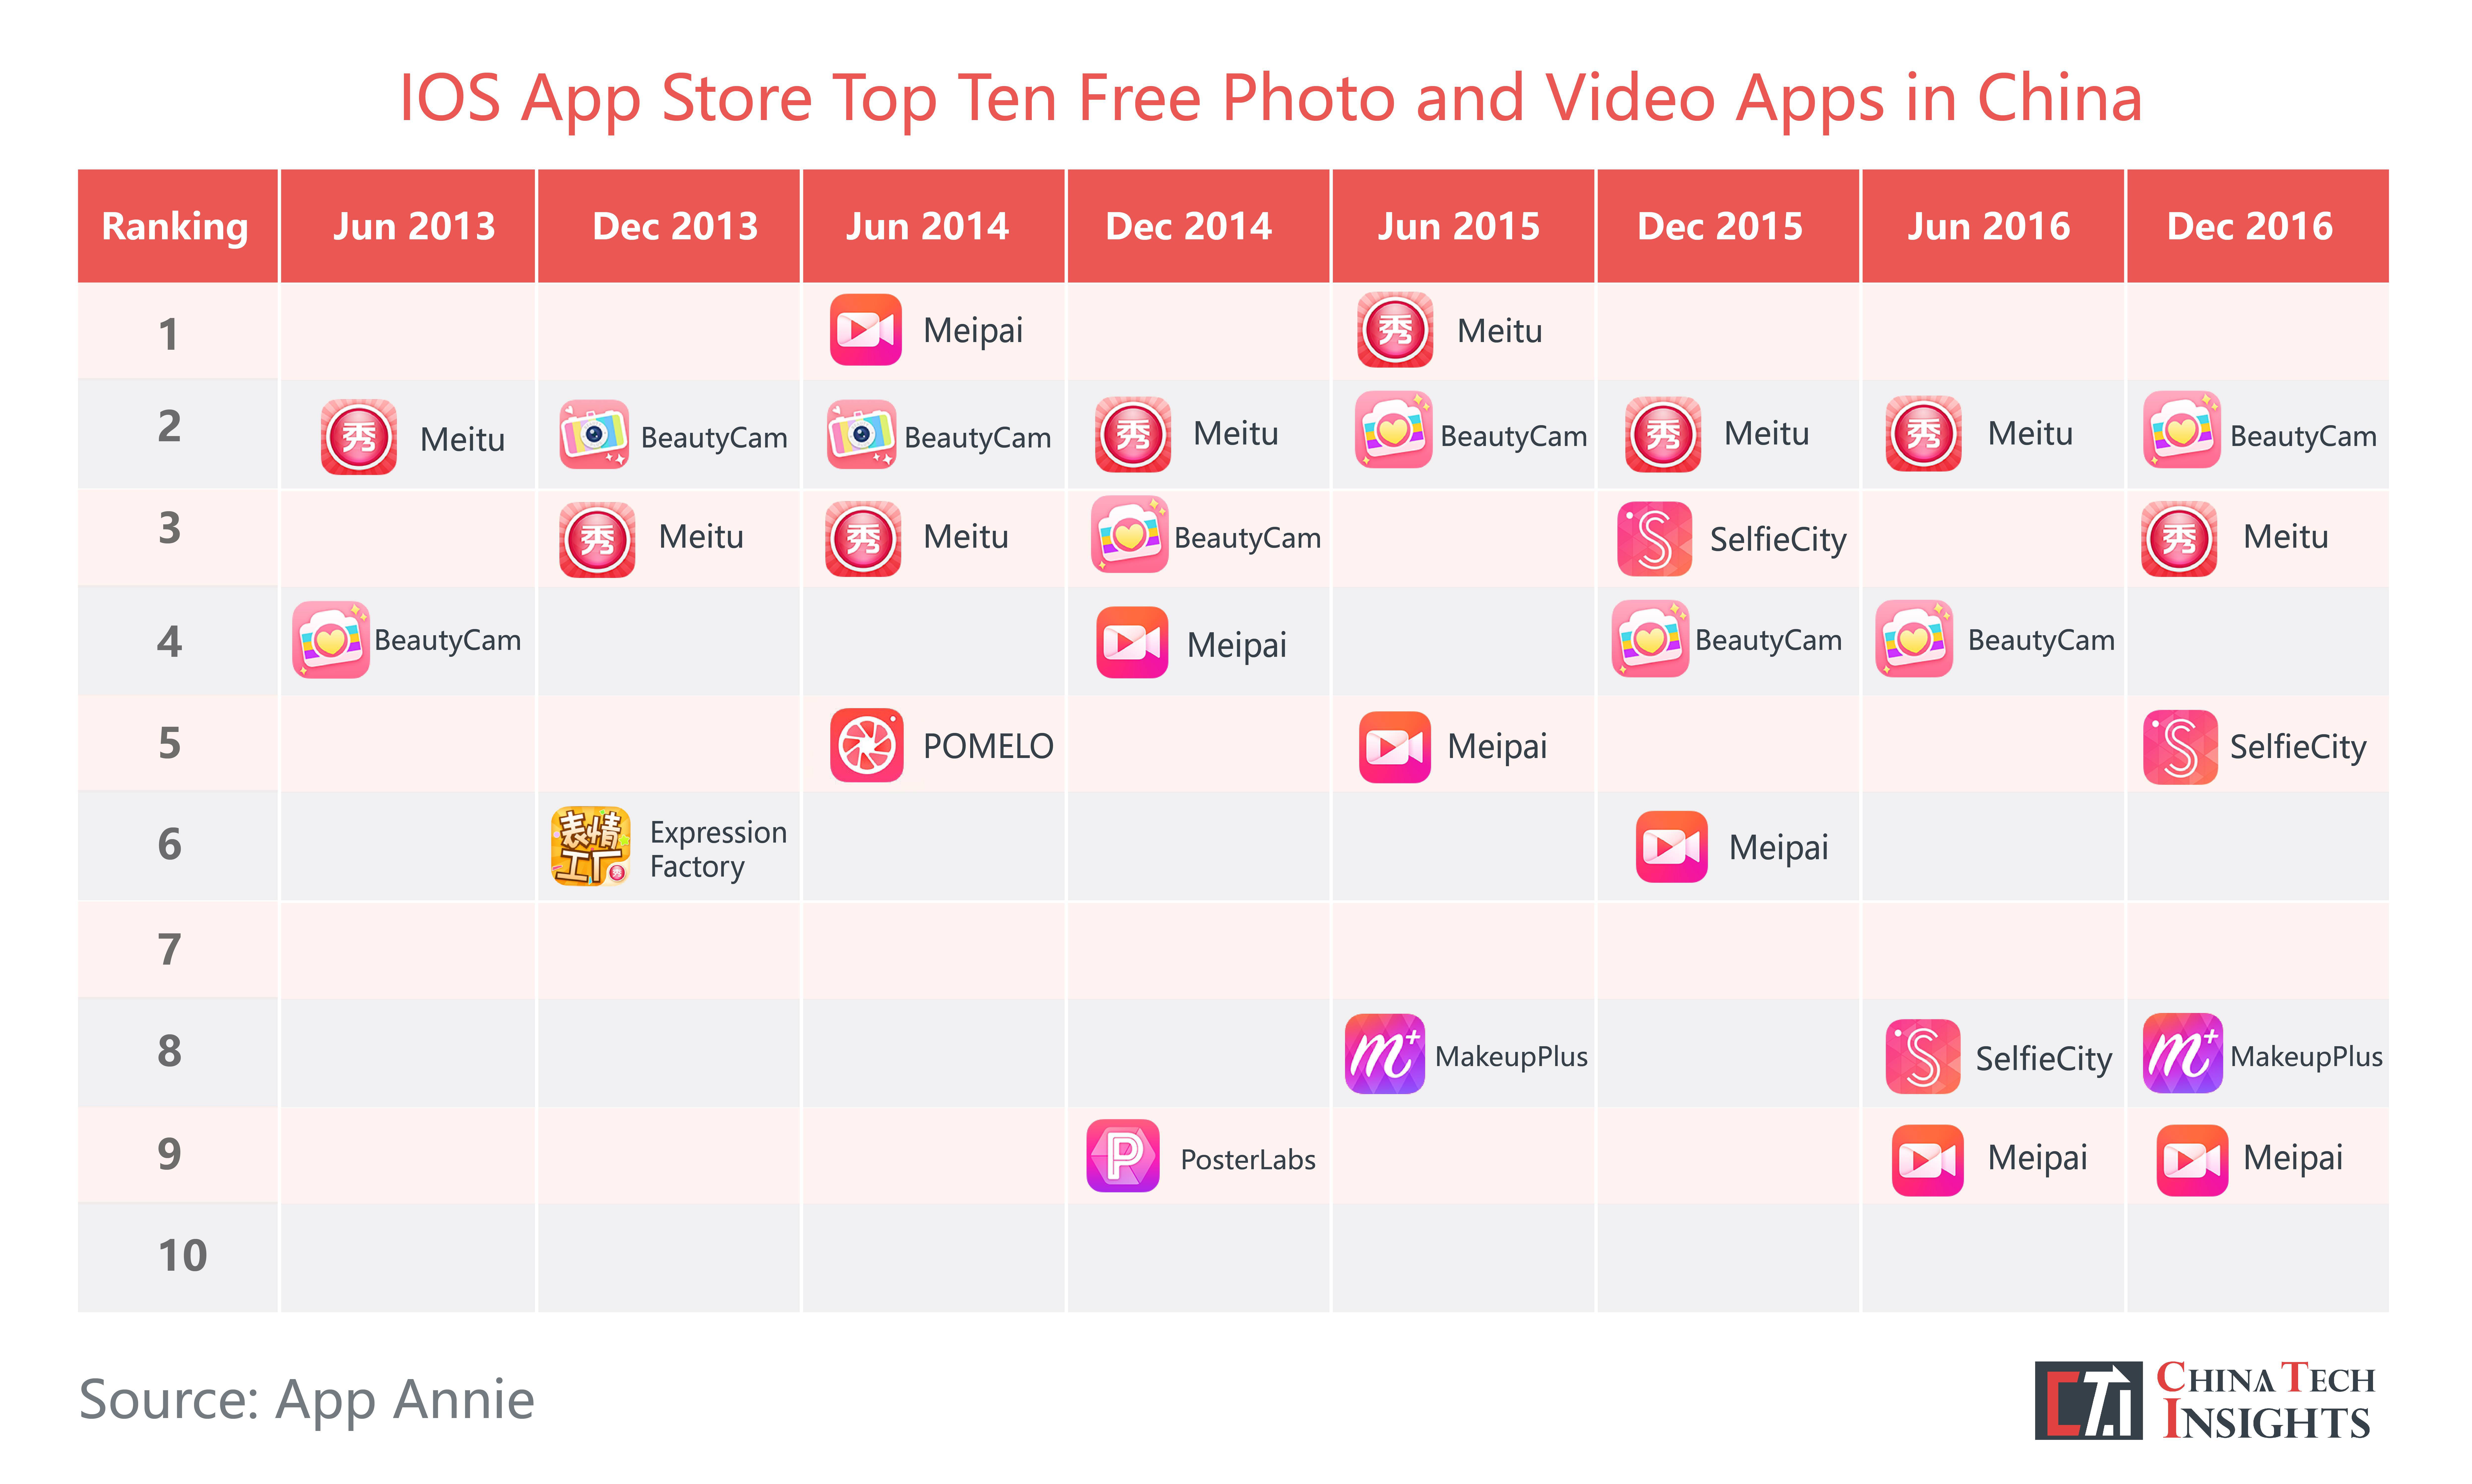 The App Store's top 10 free photo & video apps in China